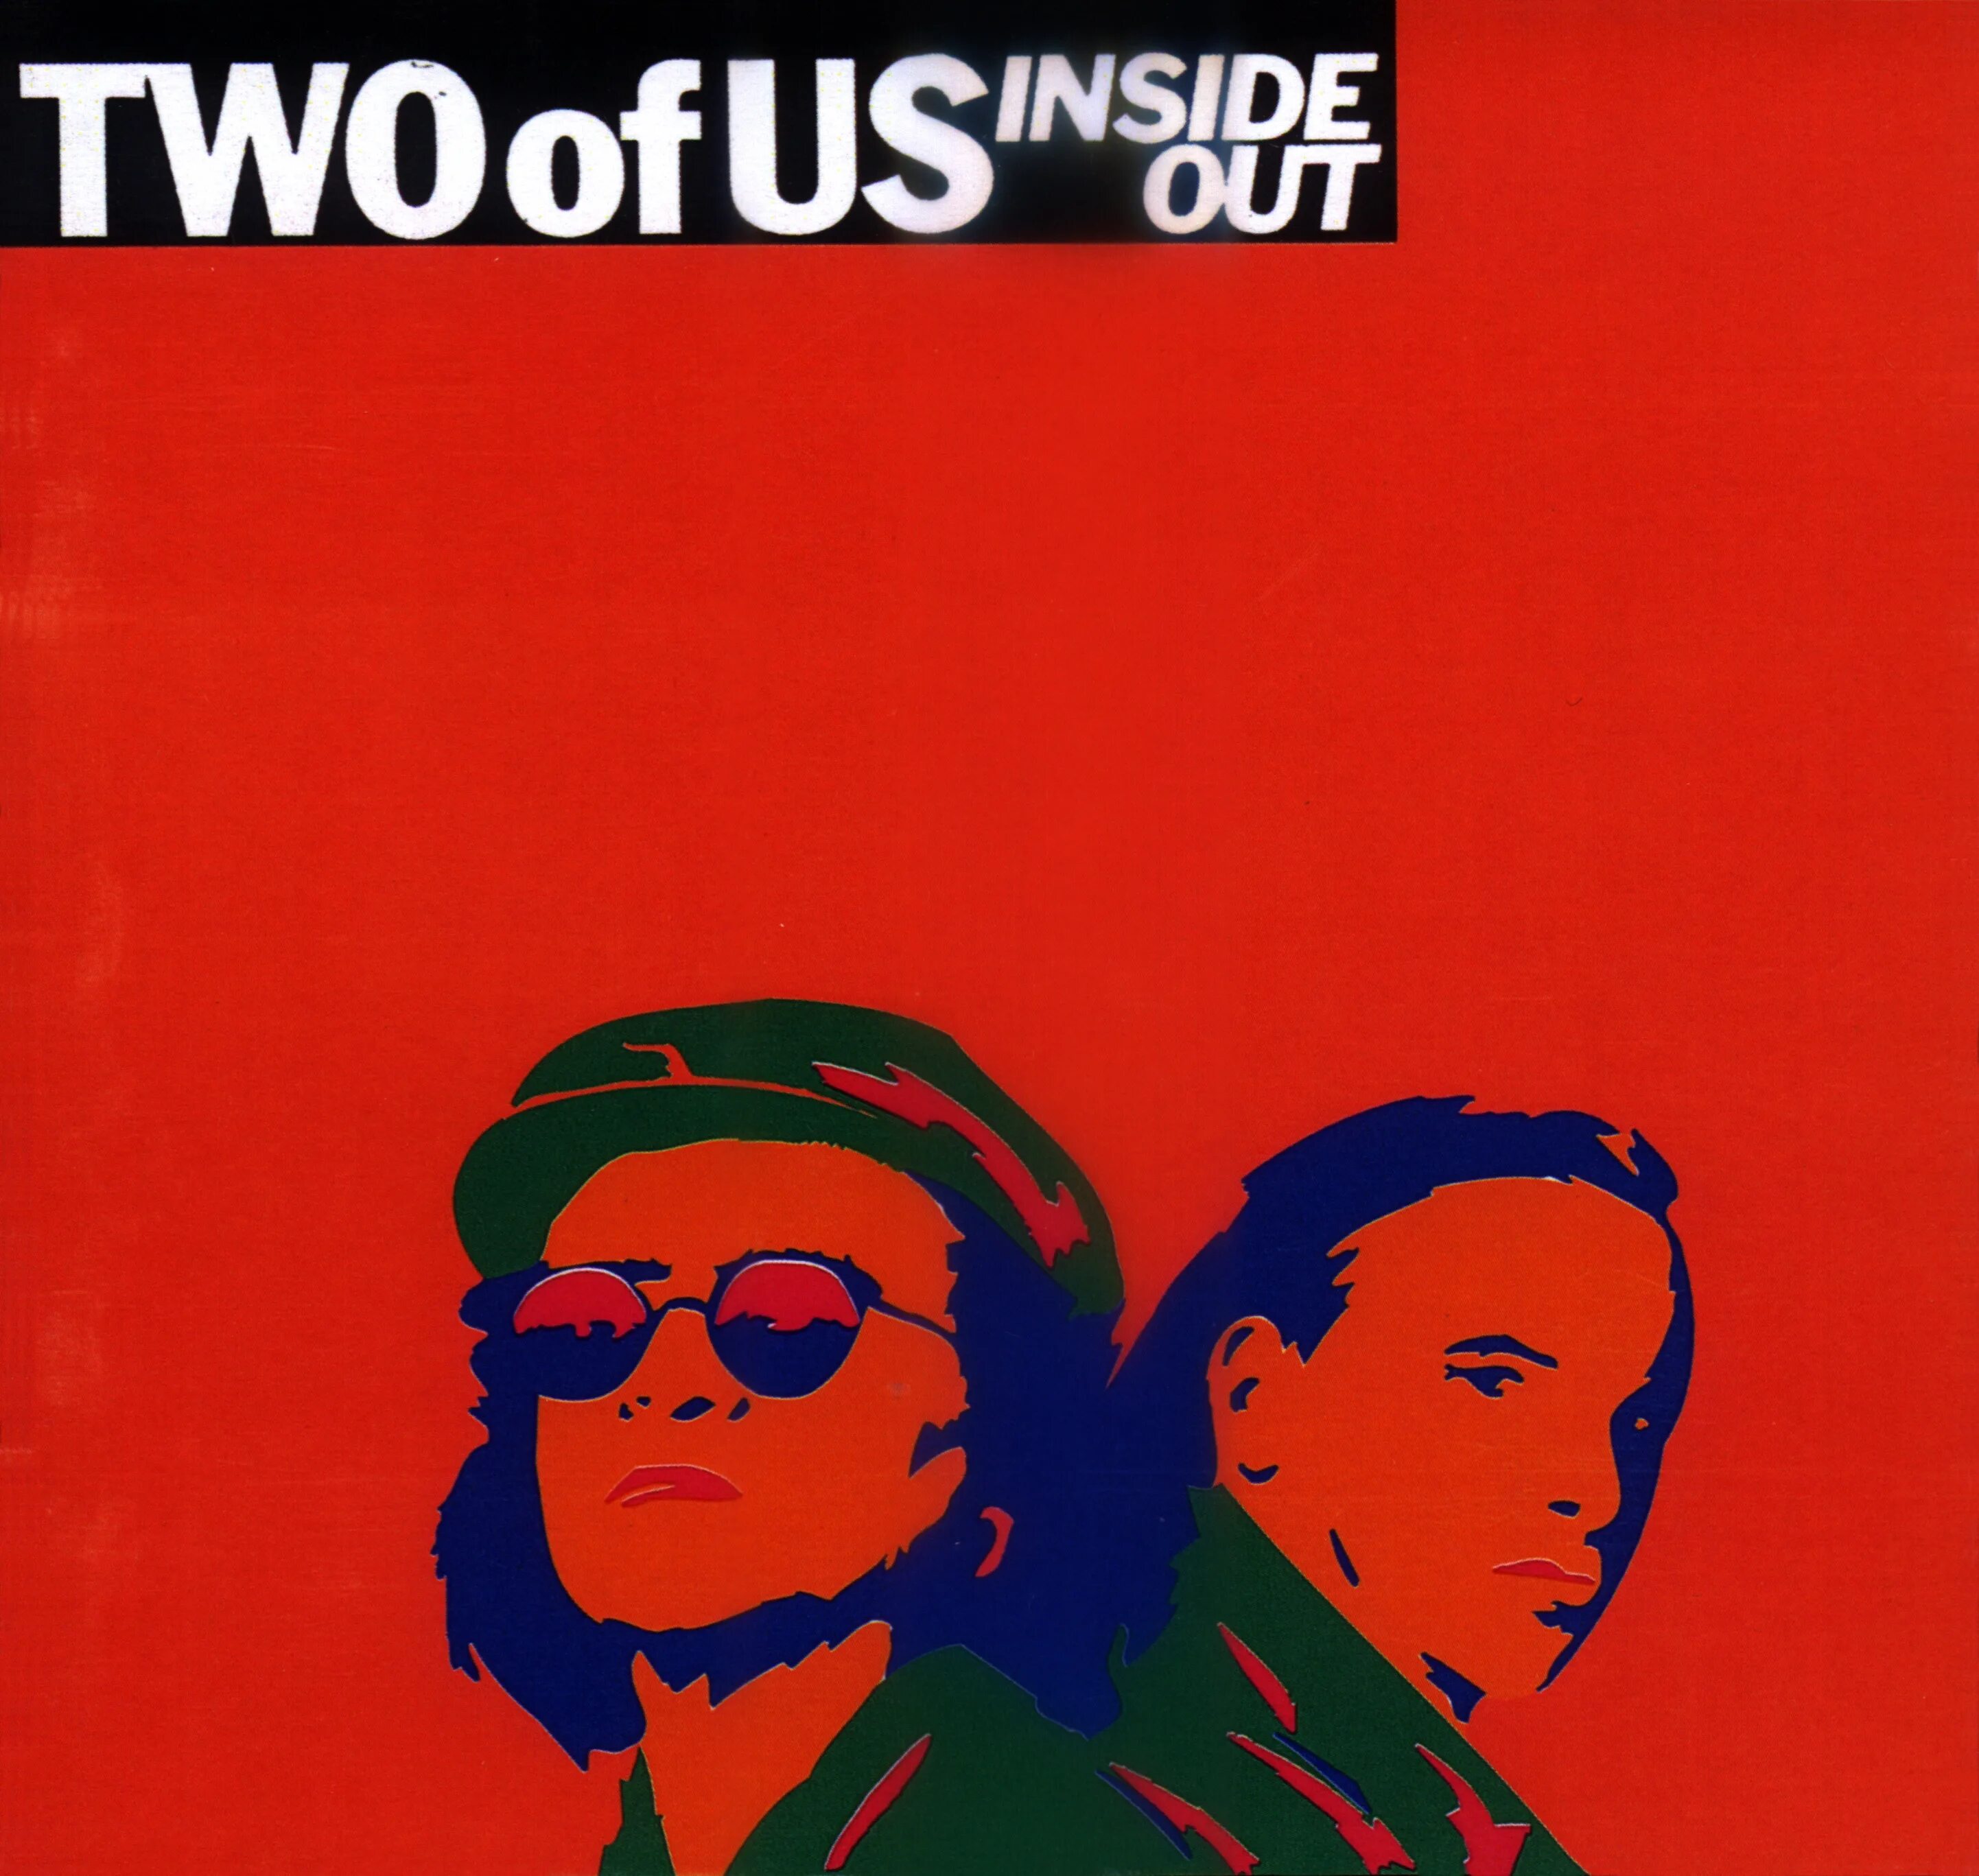 Песня two of us. Two of us. Two of us - inside out. Two of us - inside out - 1988 - LP. Two of us 1988 inside out обложка альбома.